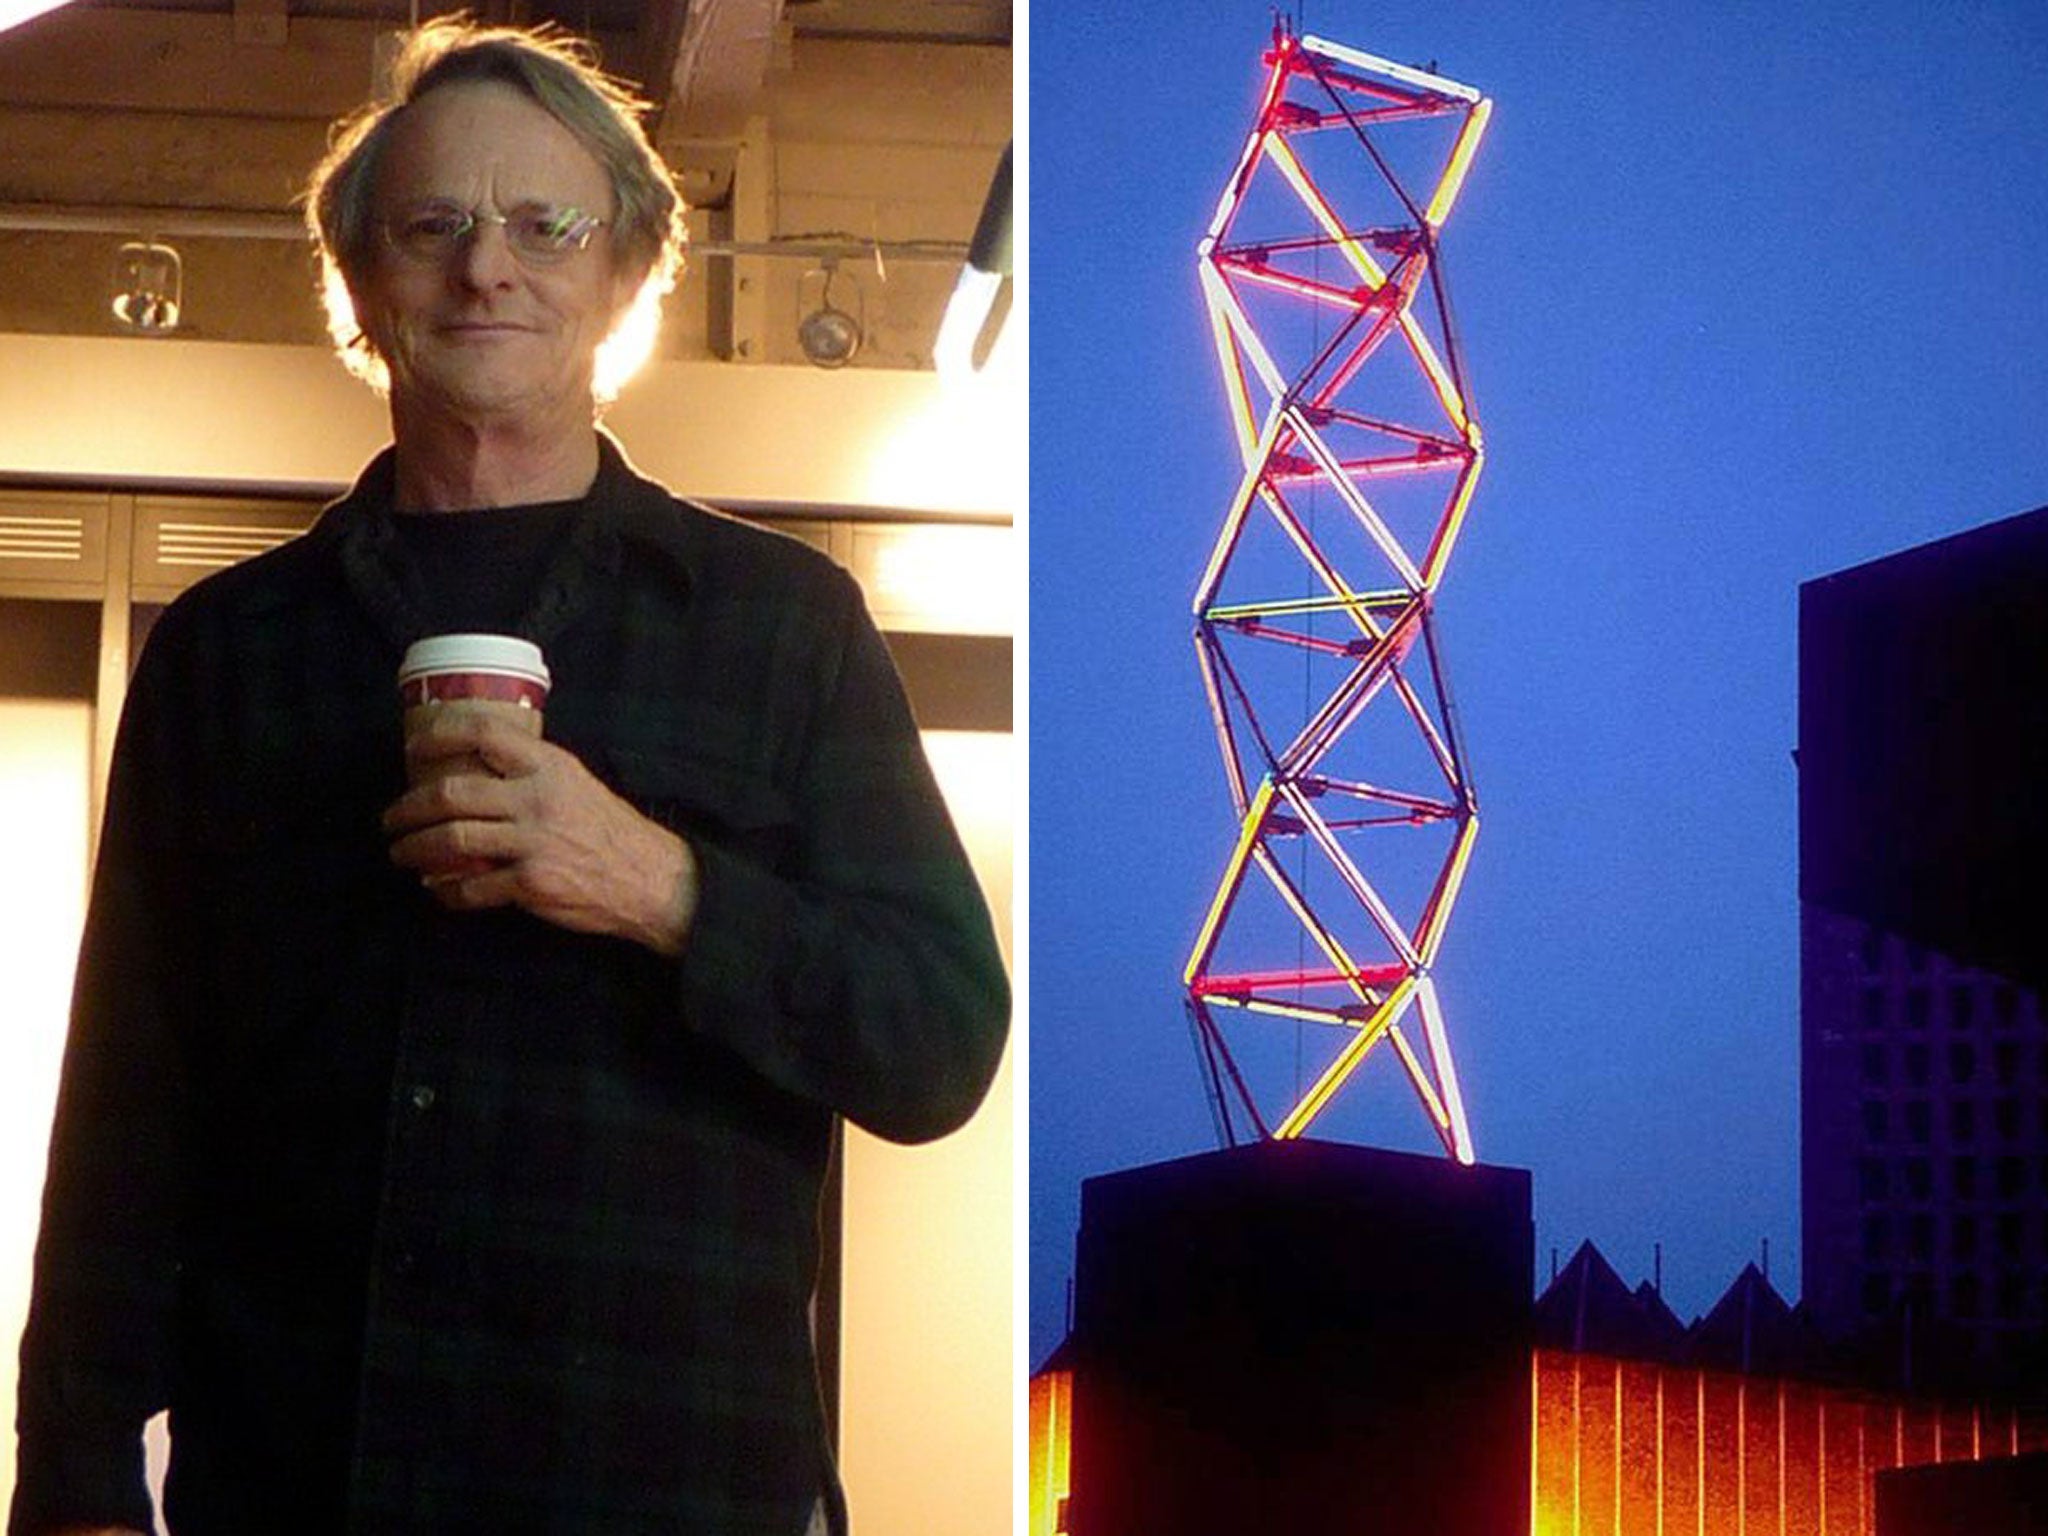 Philip Vaughan has accused the Hayward gallery’s executives of going back on plans to restore his Neon Tower work, right